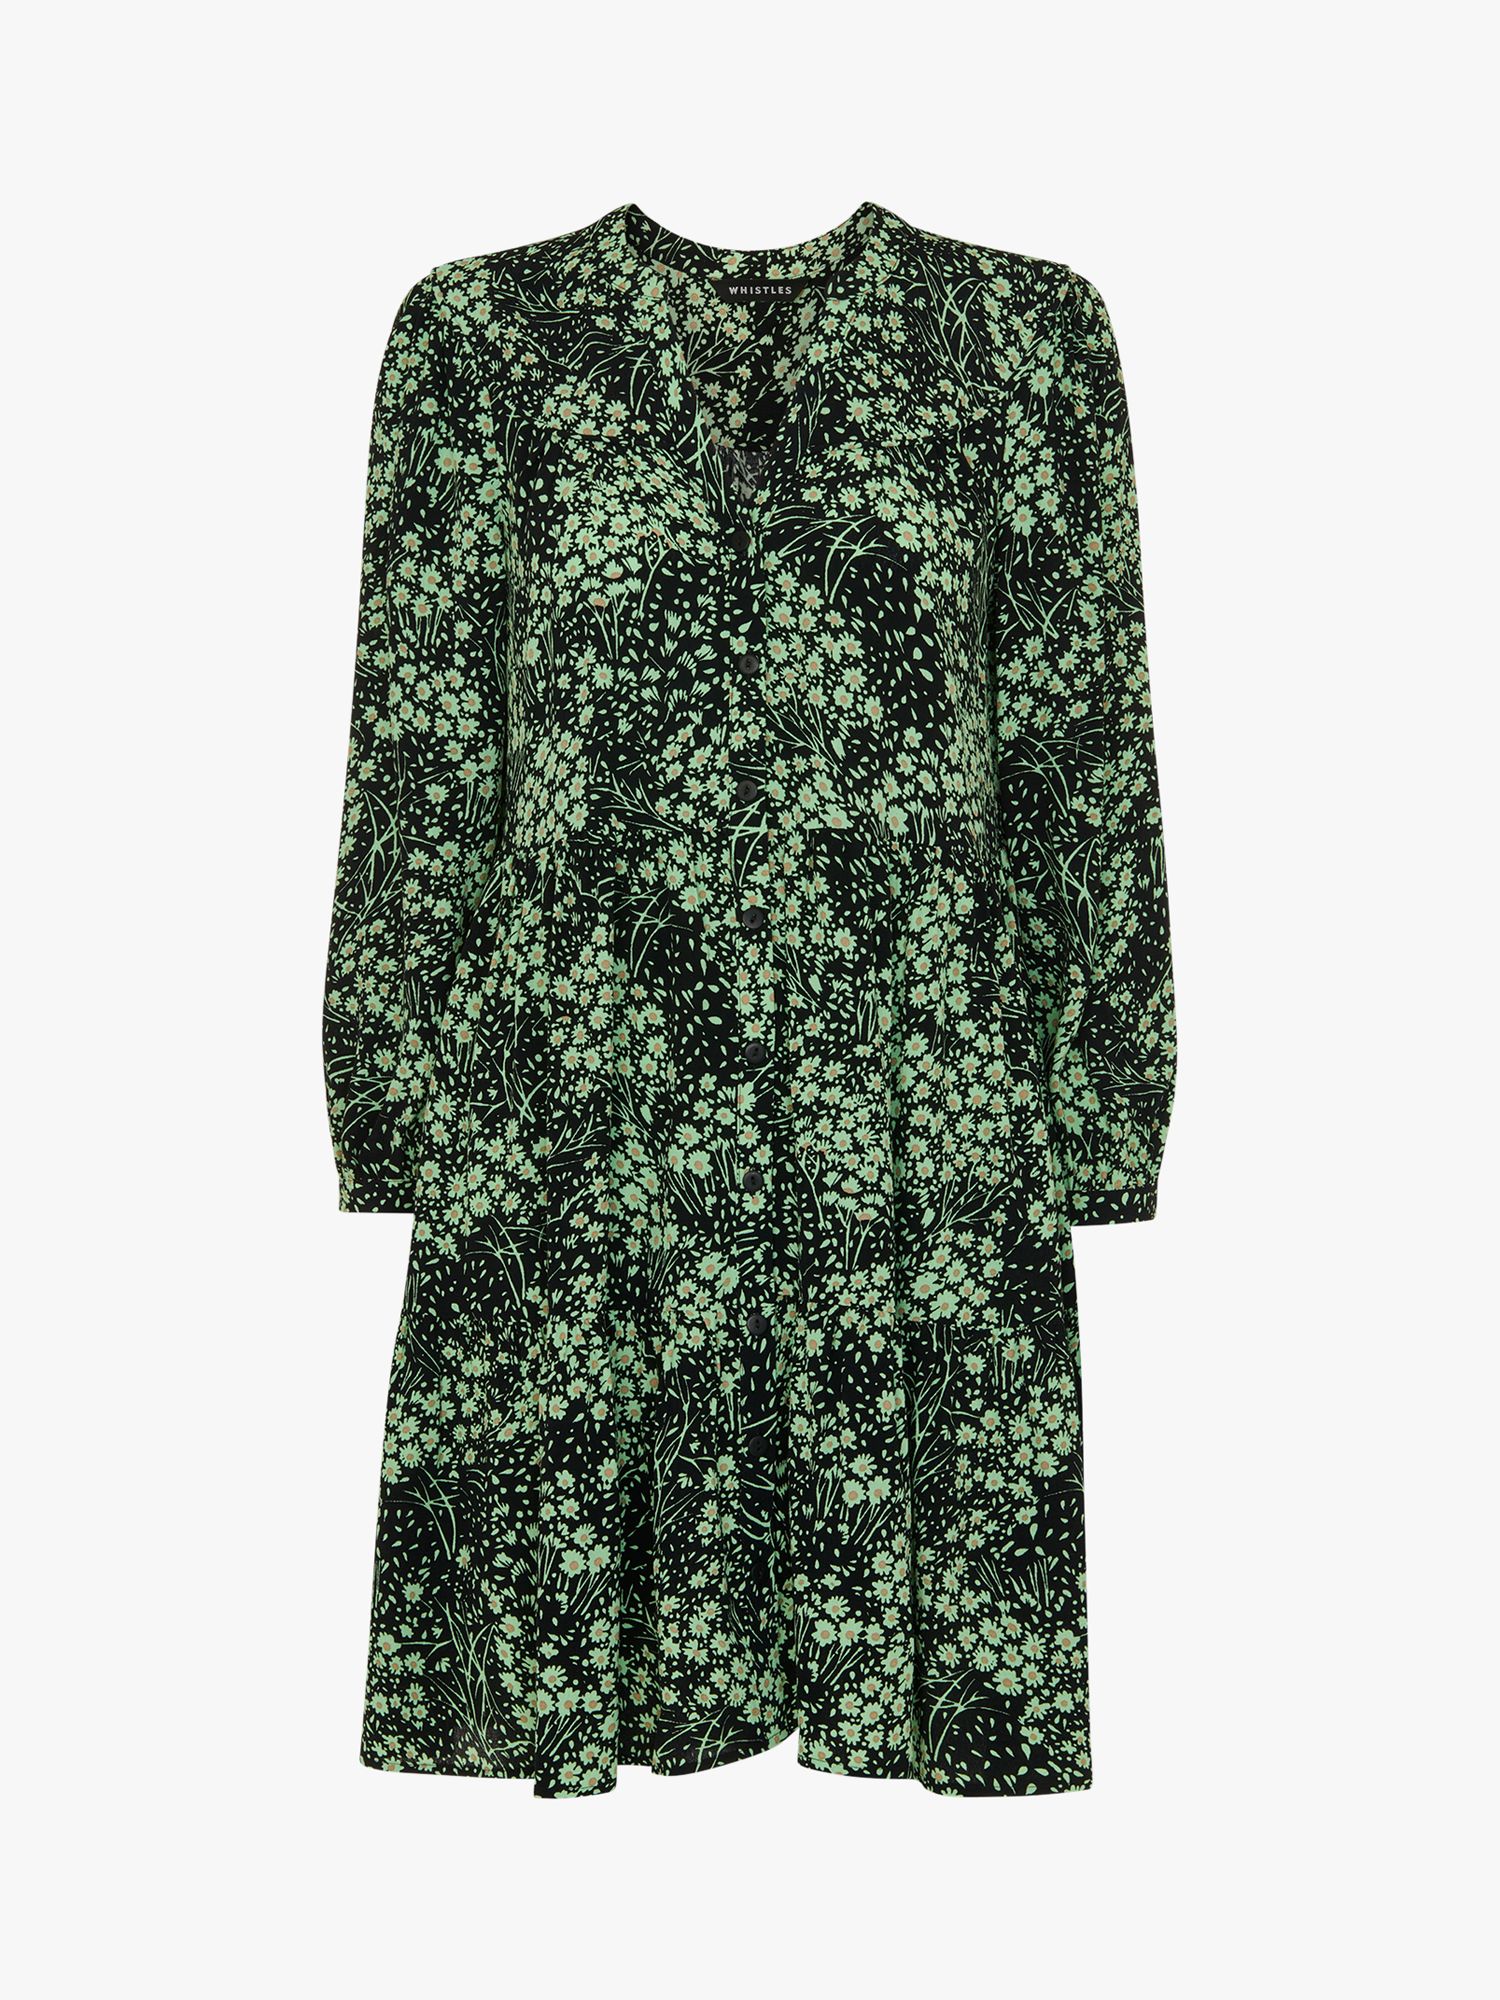 Buy Whistles Daisy Meadow Print Mini Dress, Green/Multi Online at johnlewis.com